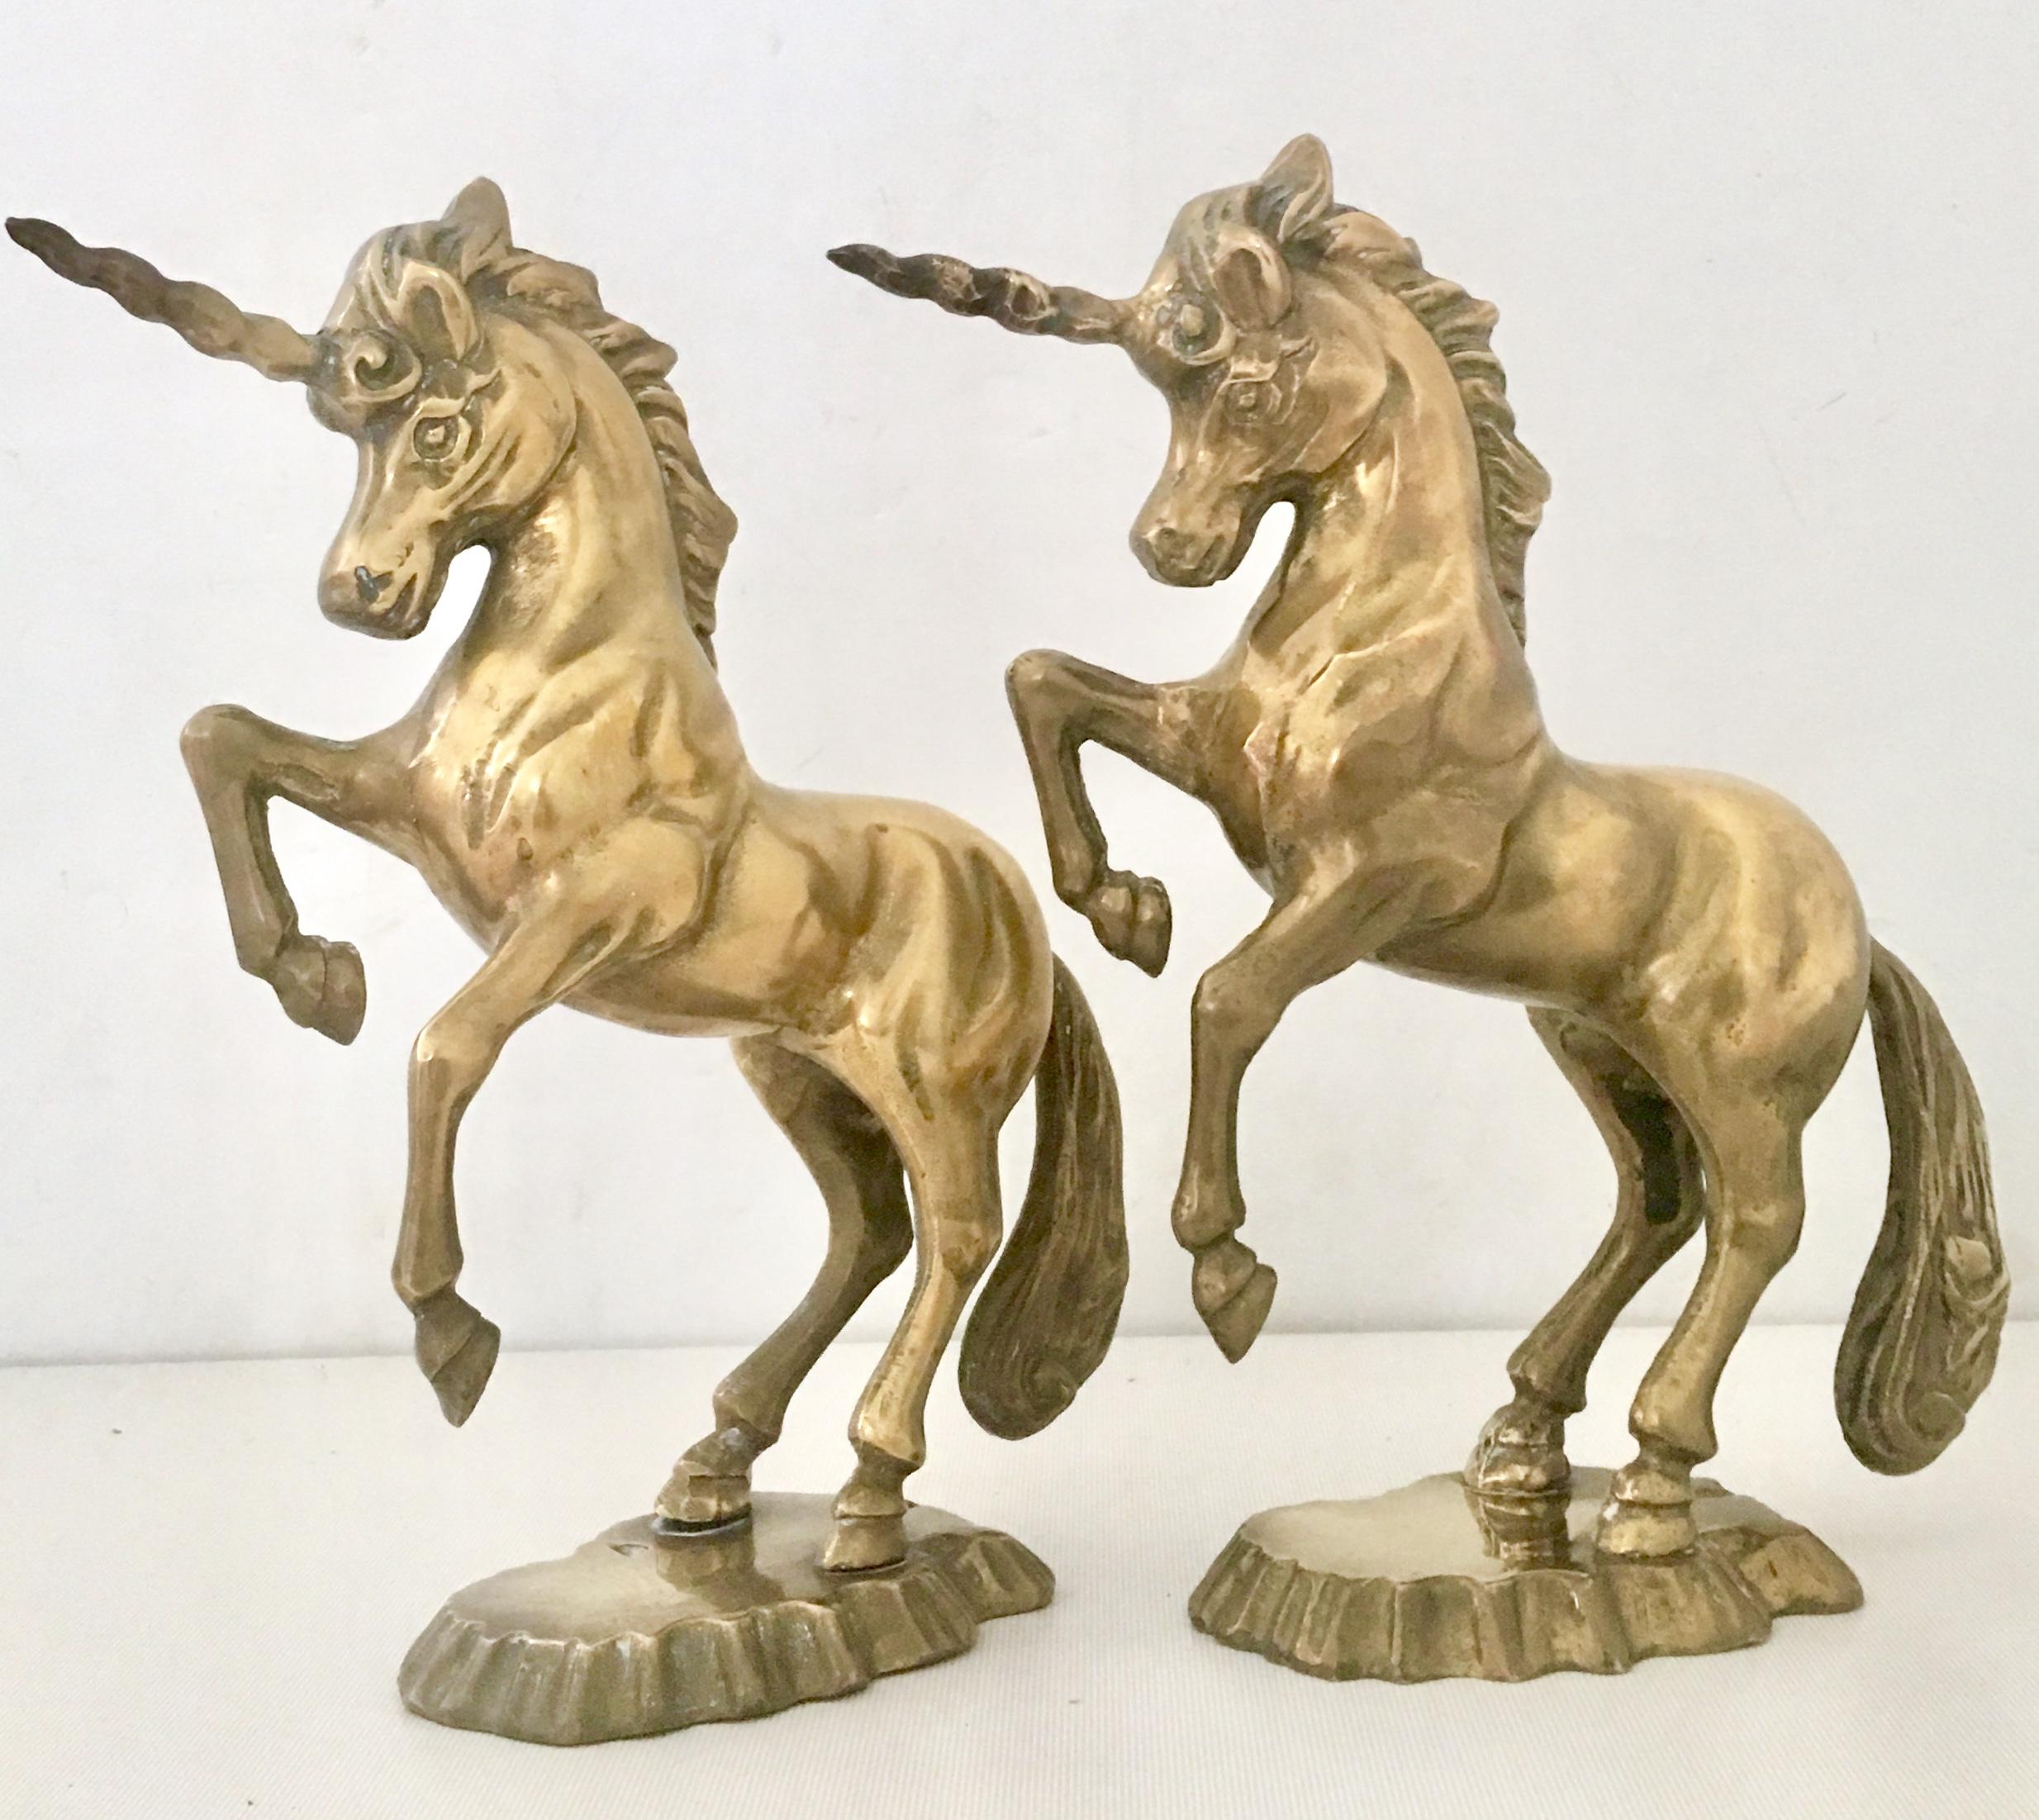 Mid-20th century pair of solid brass unicorn sculptures. These substantial polished solid brass unicorn sculptures are mounted on a abstract faux rock plateau.